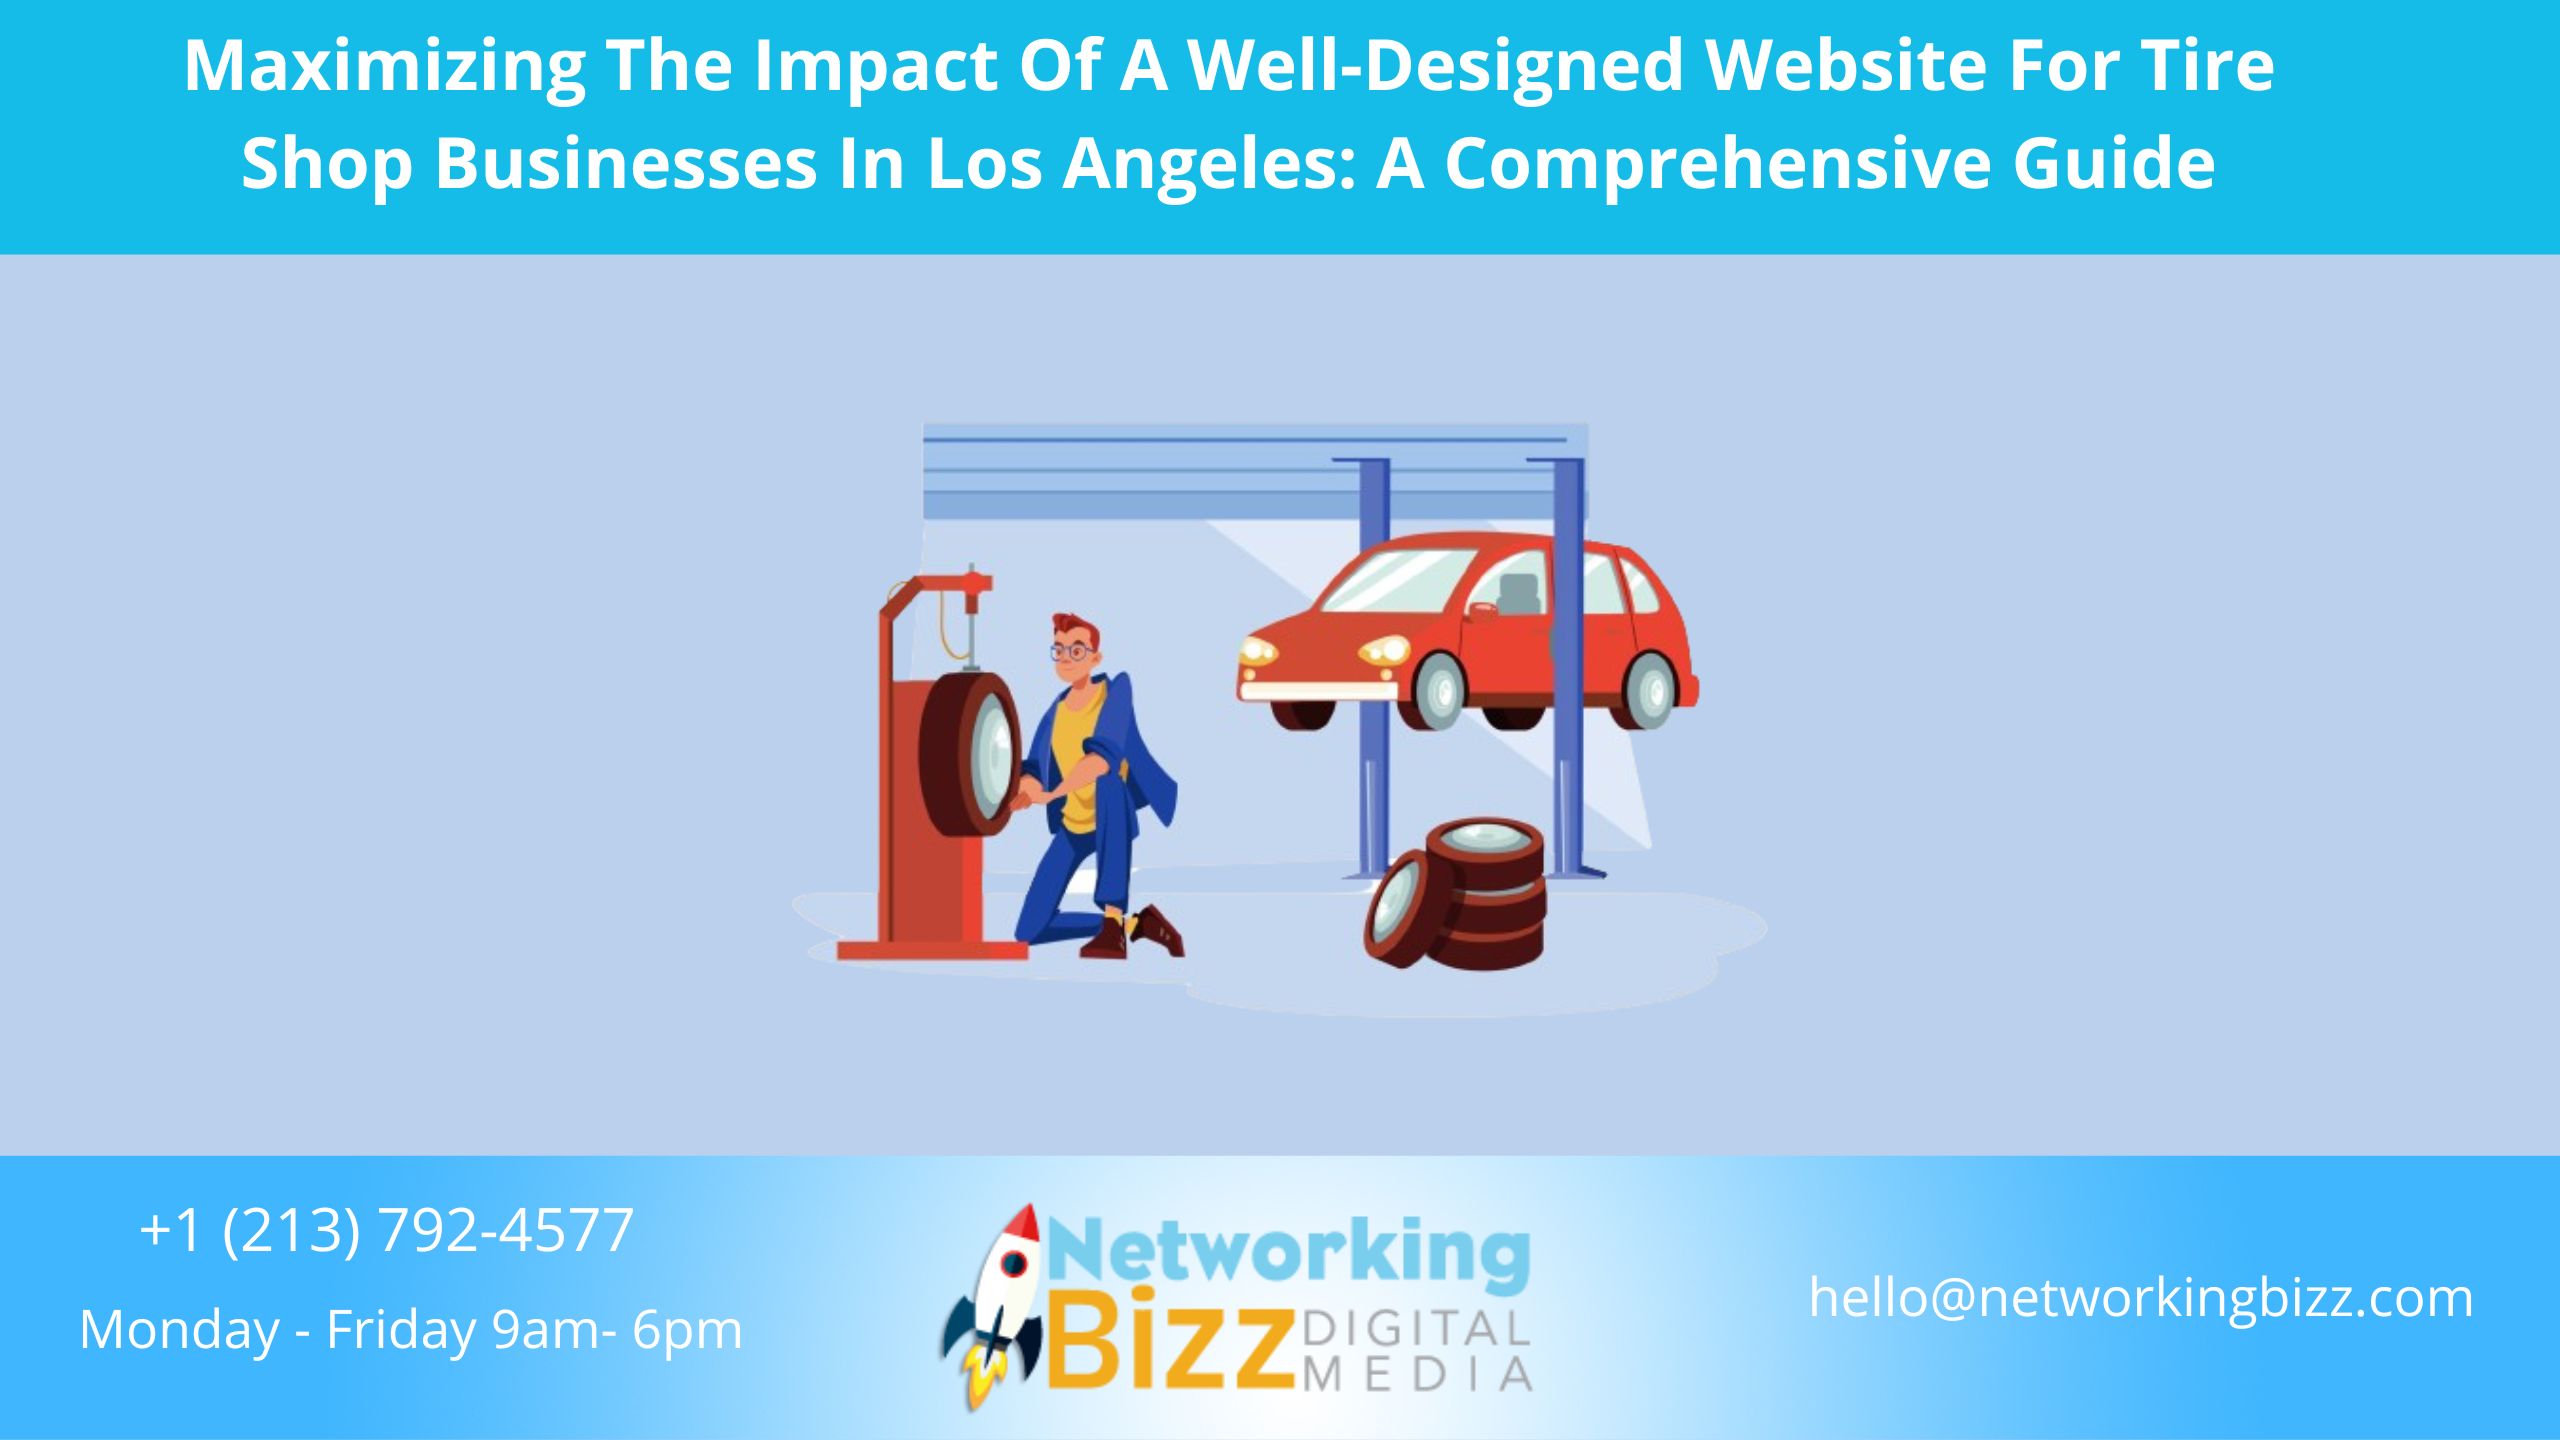 Maximizing The Impact Of A Well-Designed Website For Tire Shop Businesses In Los Angeles: A Comprehensive Guide